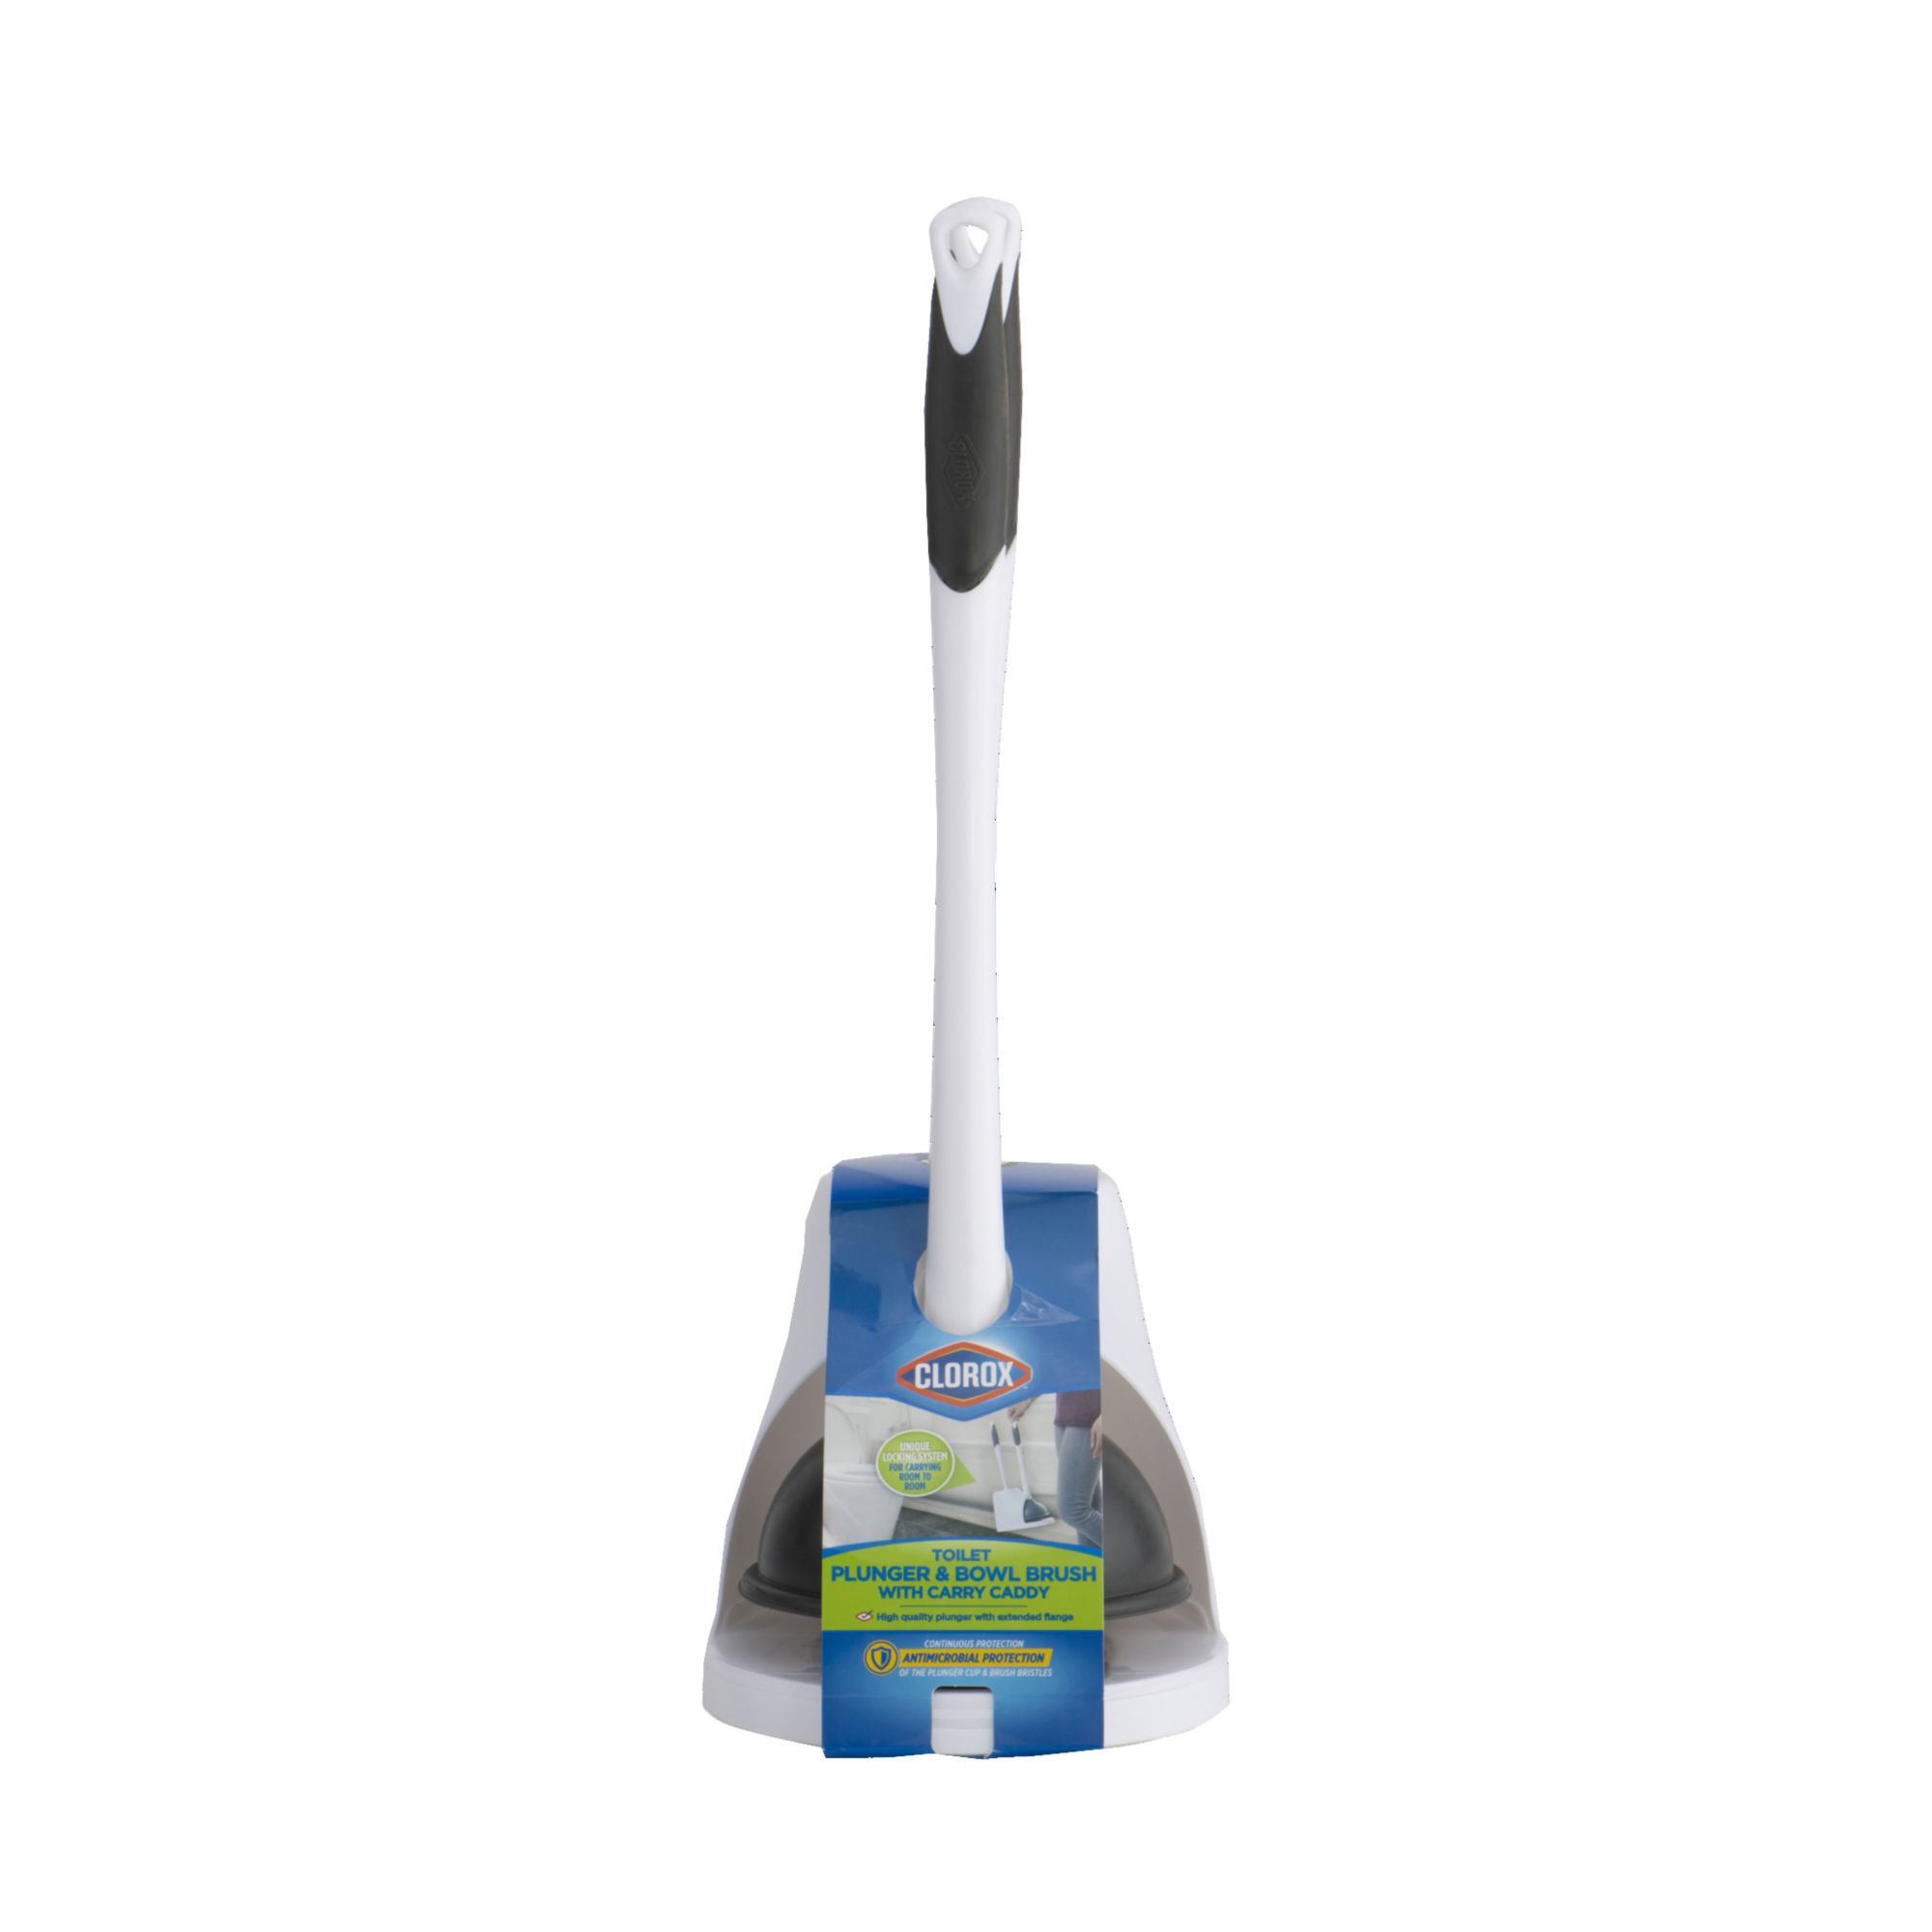 Great Value Closed Bowl Brush & Caddy